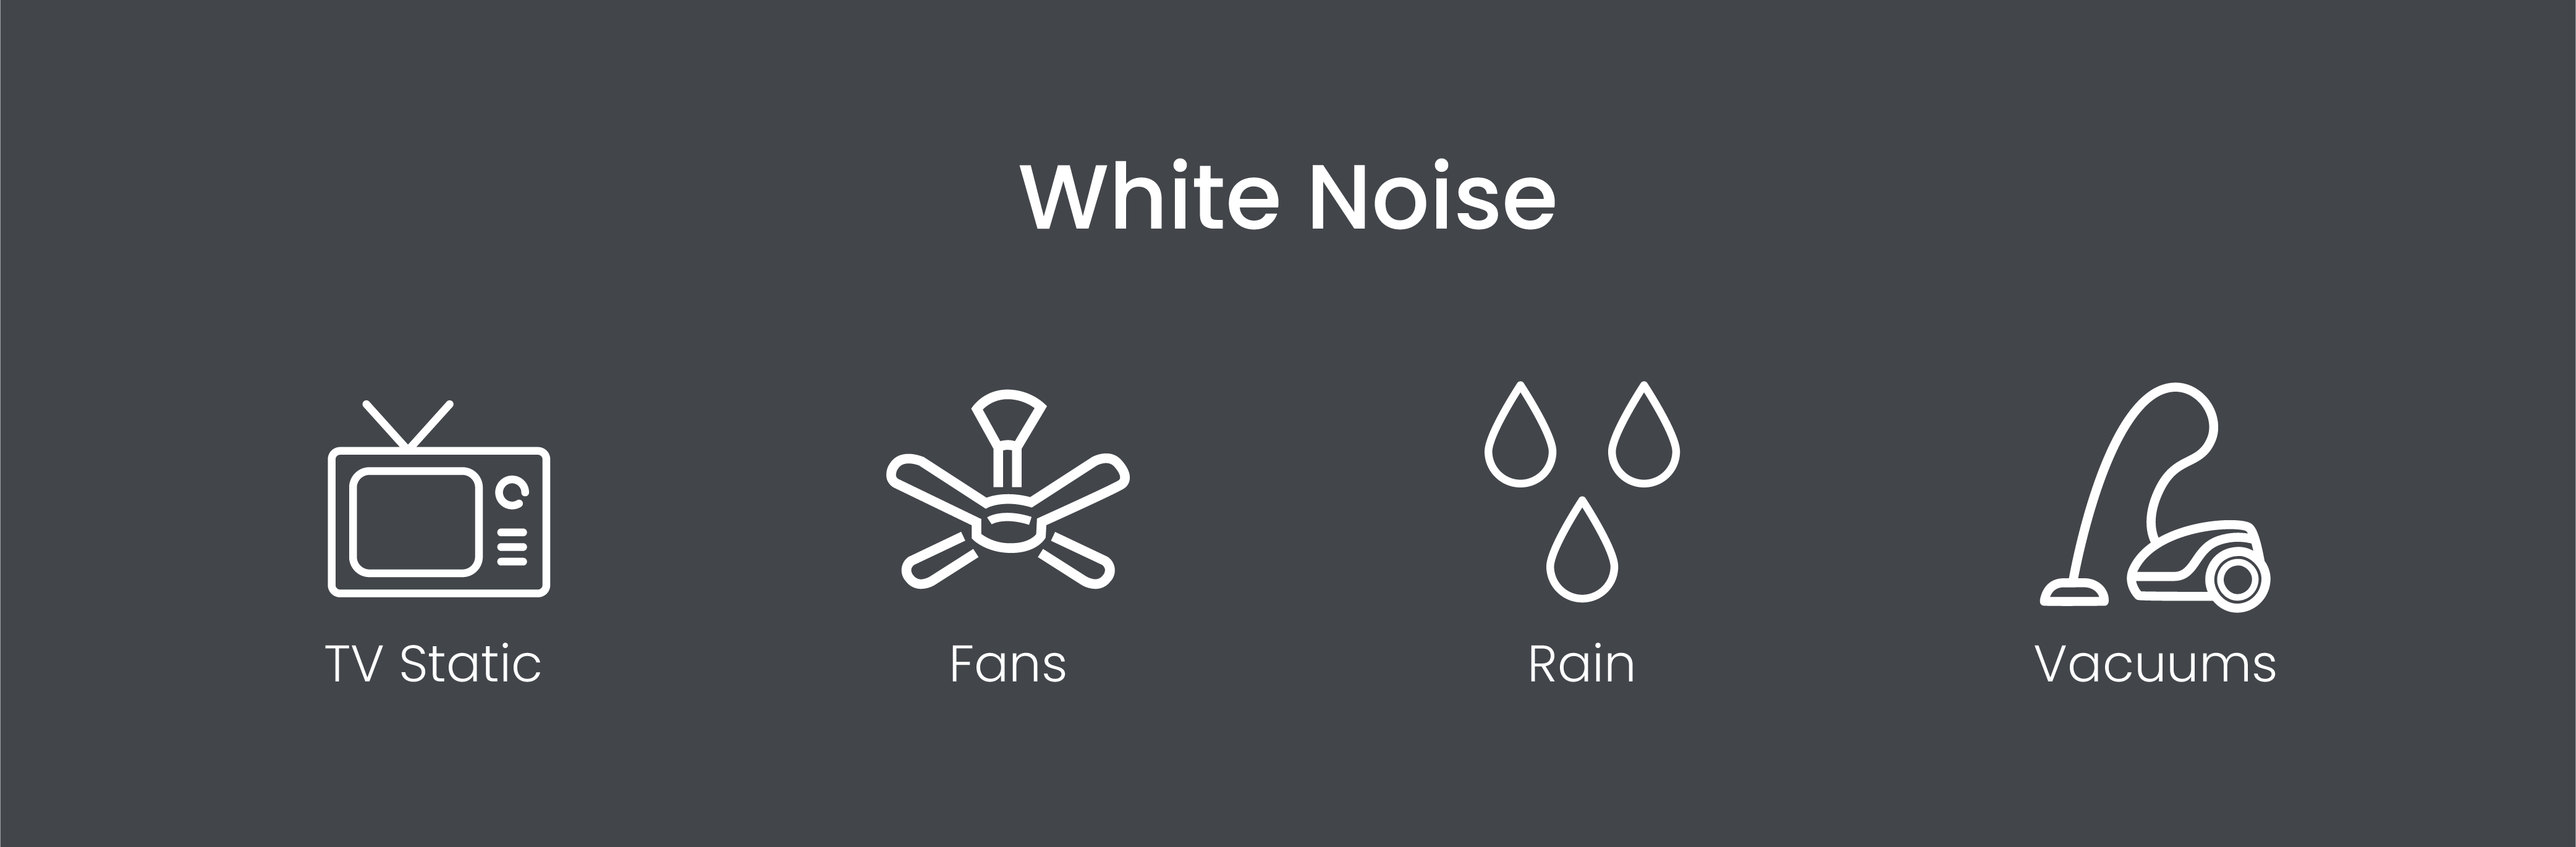 Examples of white noise